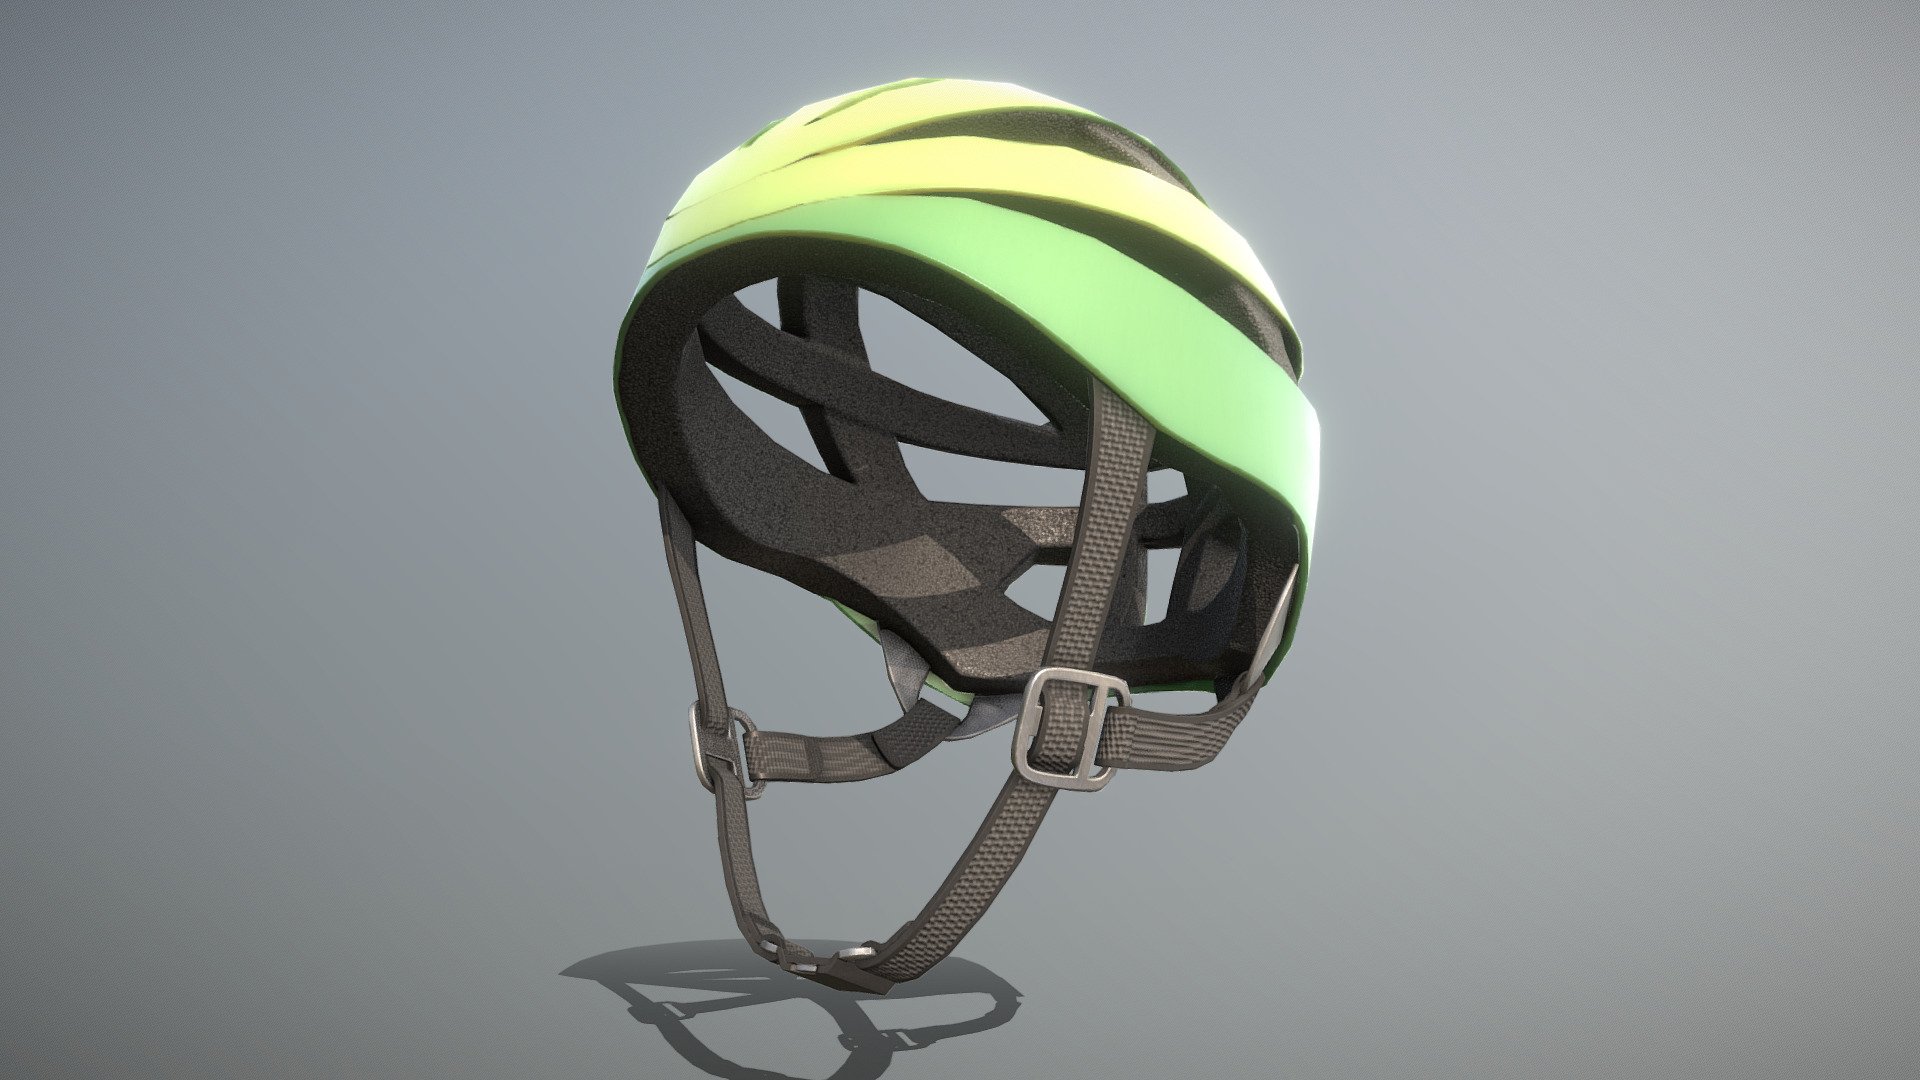 Here is the low-poly and pbr-textured version of the bicycle helmet in green.







Demo Video in Blender-3D




Object Name - Bicycle_Helmet_Green_Low 



Object Dimensions -  0.284m x 0.222m x 0.309m






Vertices = 1522

Edges = 4618

Polygons = 3054






Texture map types (4K) : Base Color, Normal, Metalness, Roughness



3D model formats: 




Native format (*.blend)

Autodesk FBX (.fbx)

OBJ (.obj, .mtl)

glTF (.gltf, .glb)

X3D (.x3d)

Collada (.dae)

Stereolithography (.stl)

Polygon File Format (.ply)

Alembic (.abc)

DXF (.dxf)

USDC



Last update:
21:56:32  24.08.22 - Bicycle Helmet Green (Low-Poly Version) - Buy Royalty Free 3D model by VIS-All-3D (@VIS-All) 3d model